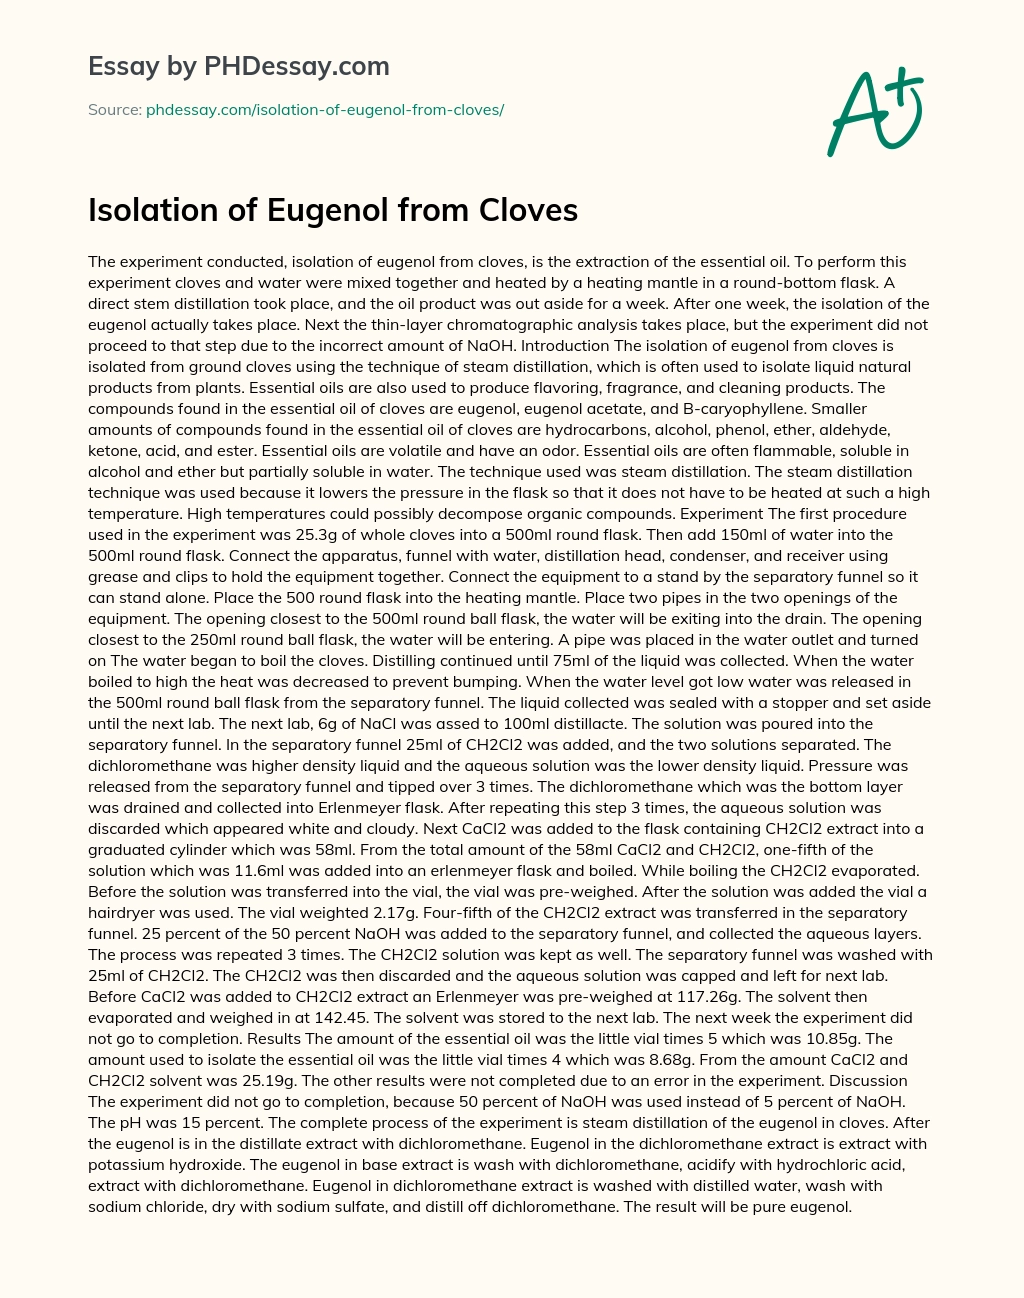 isolation of eugenol from cloves reaction